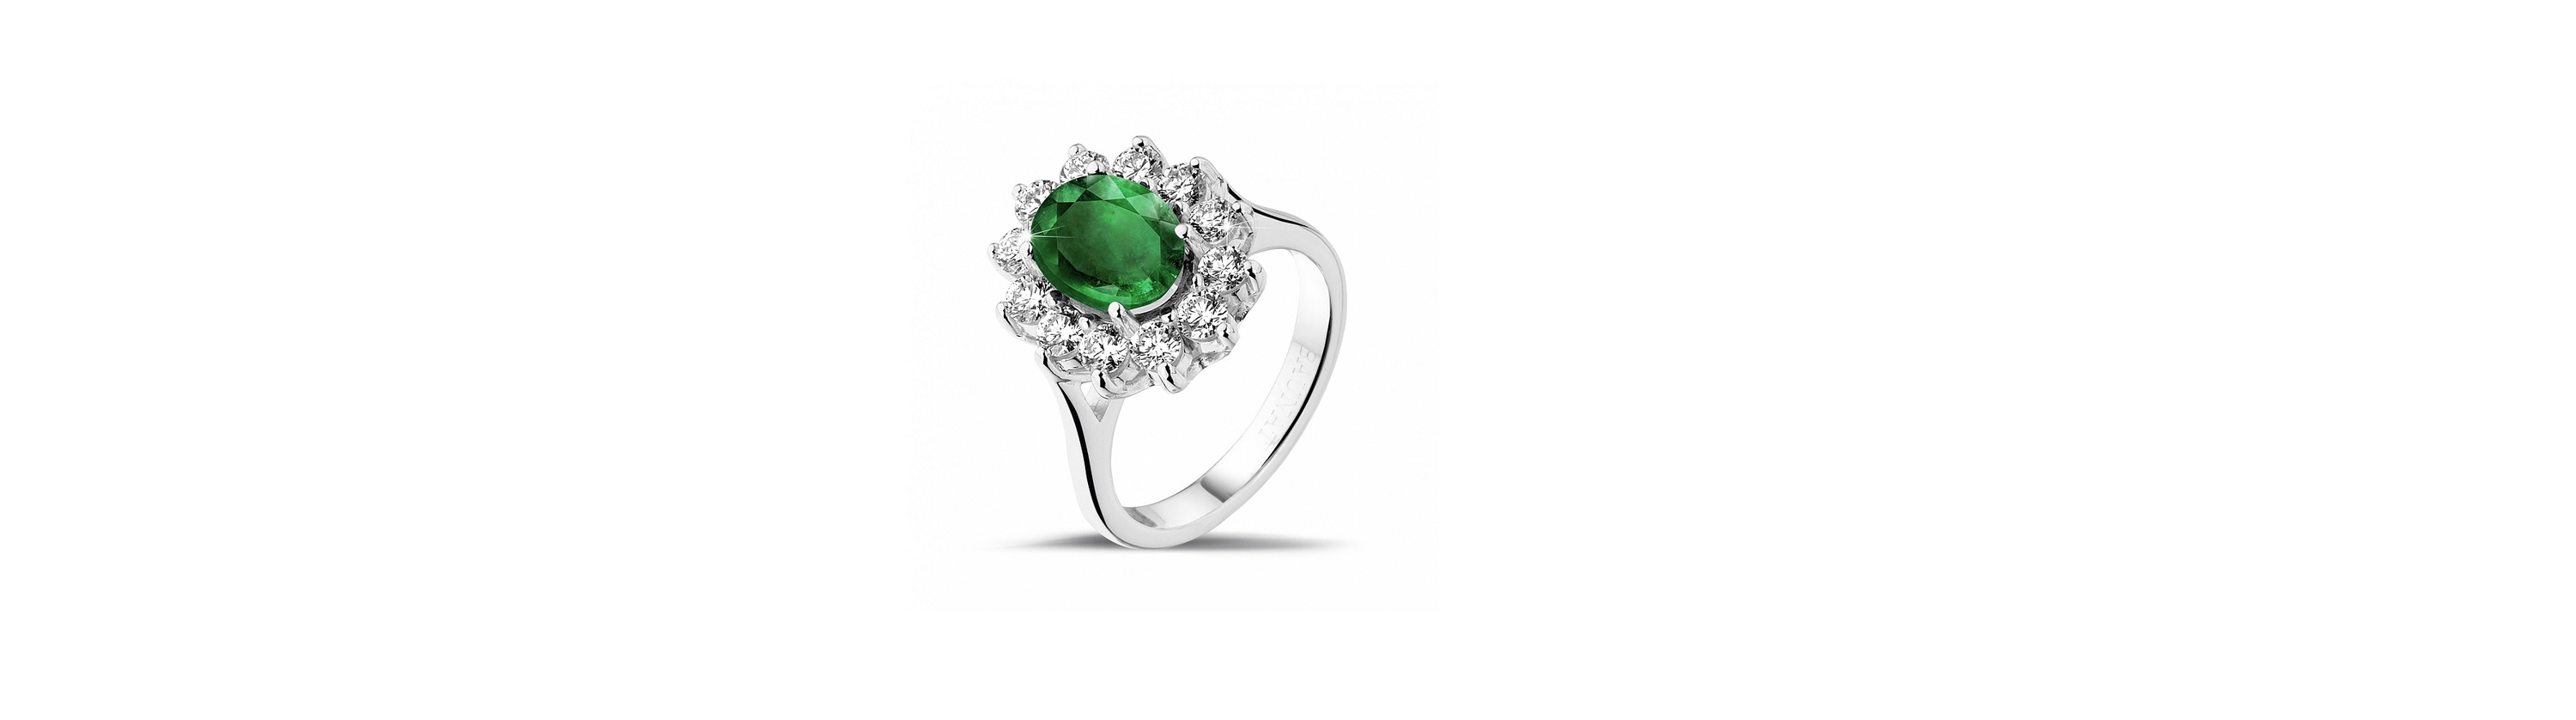 Should I choose a green sapphire in the engagement ring? 